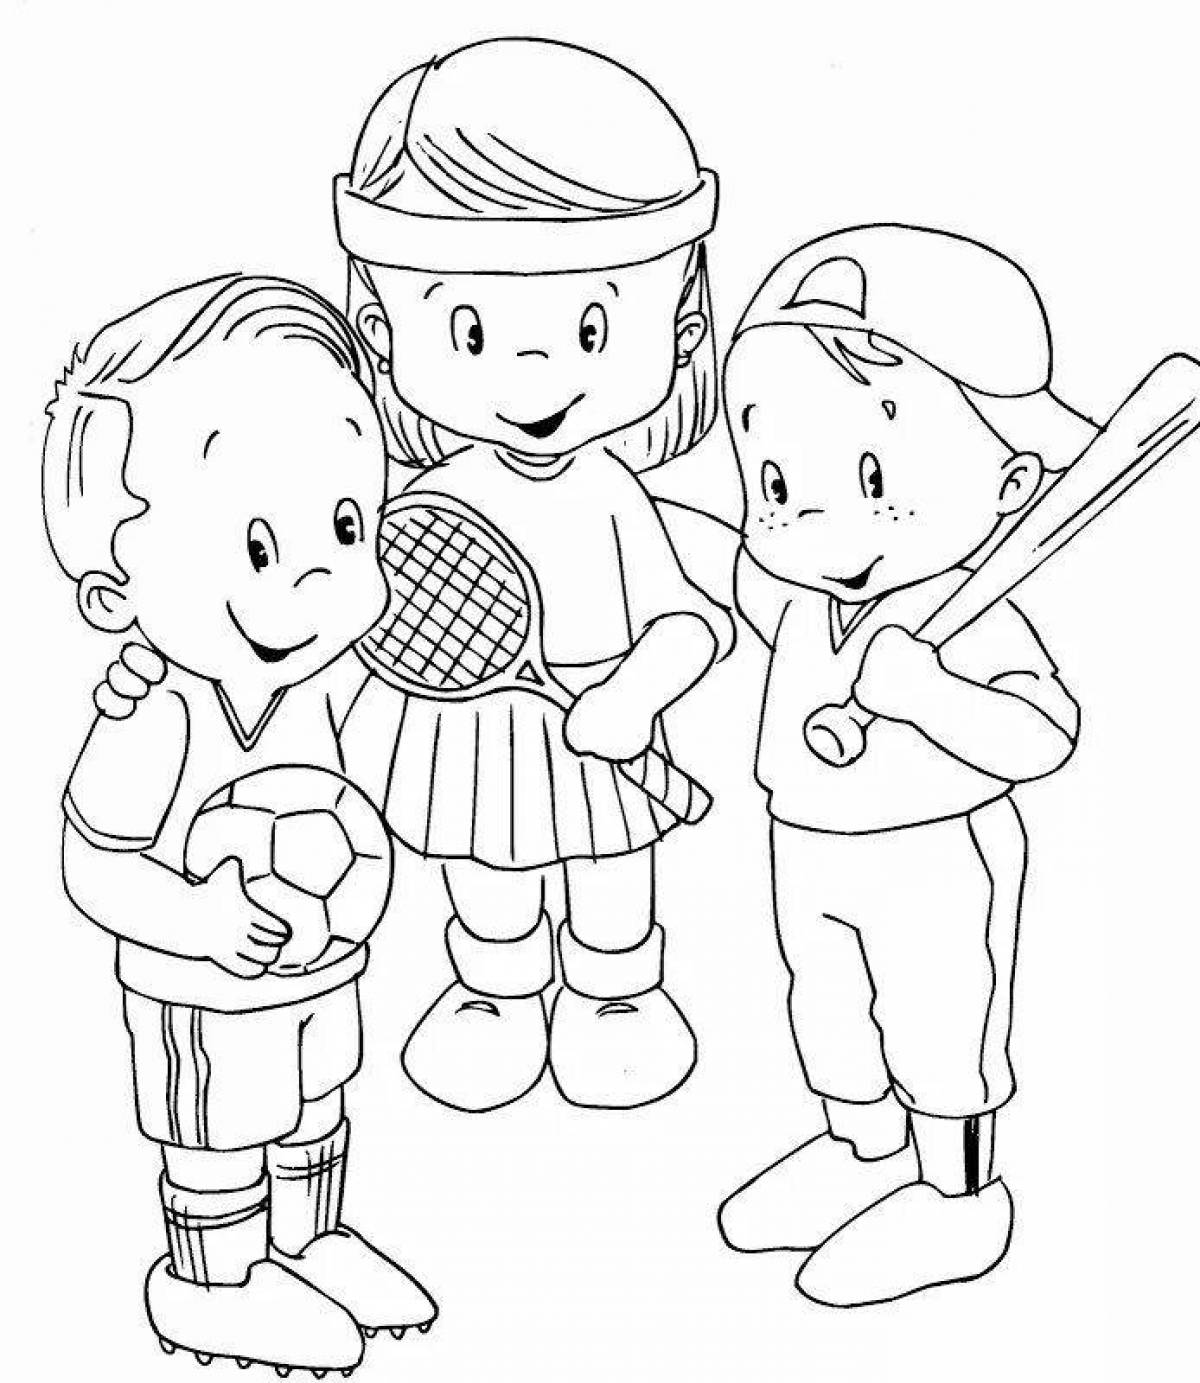 Coloring pages me and my friends are crazy about colors